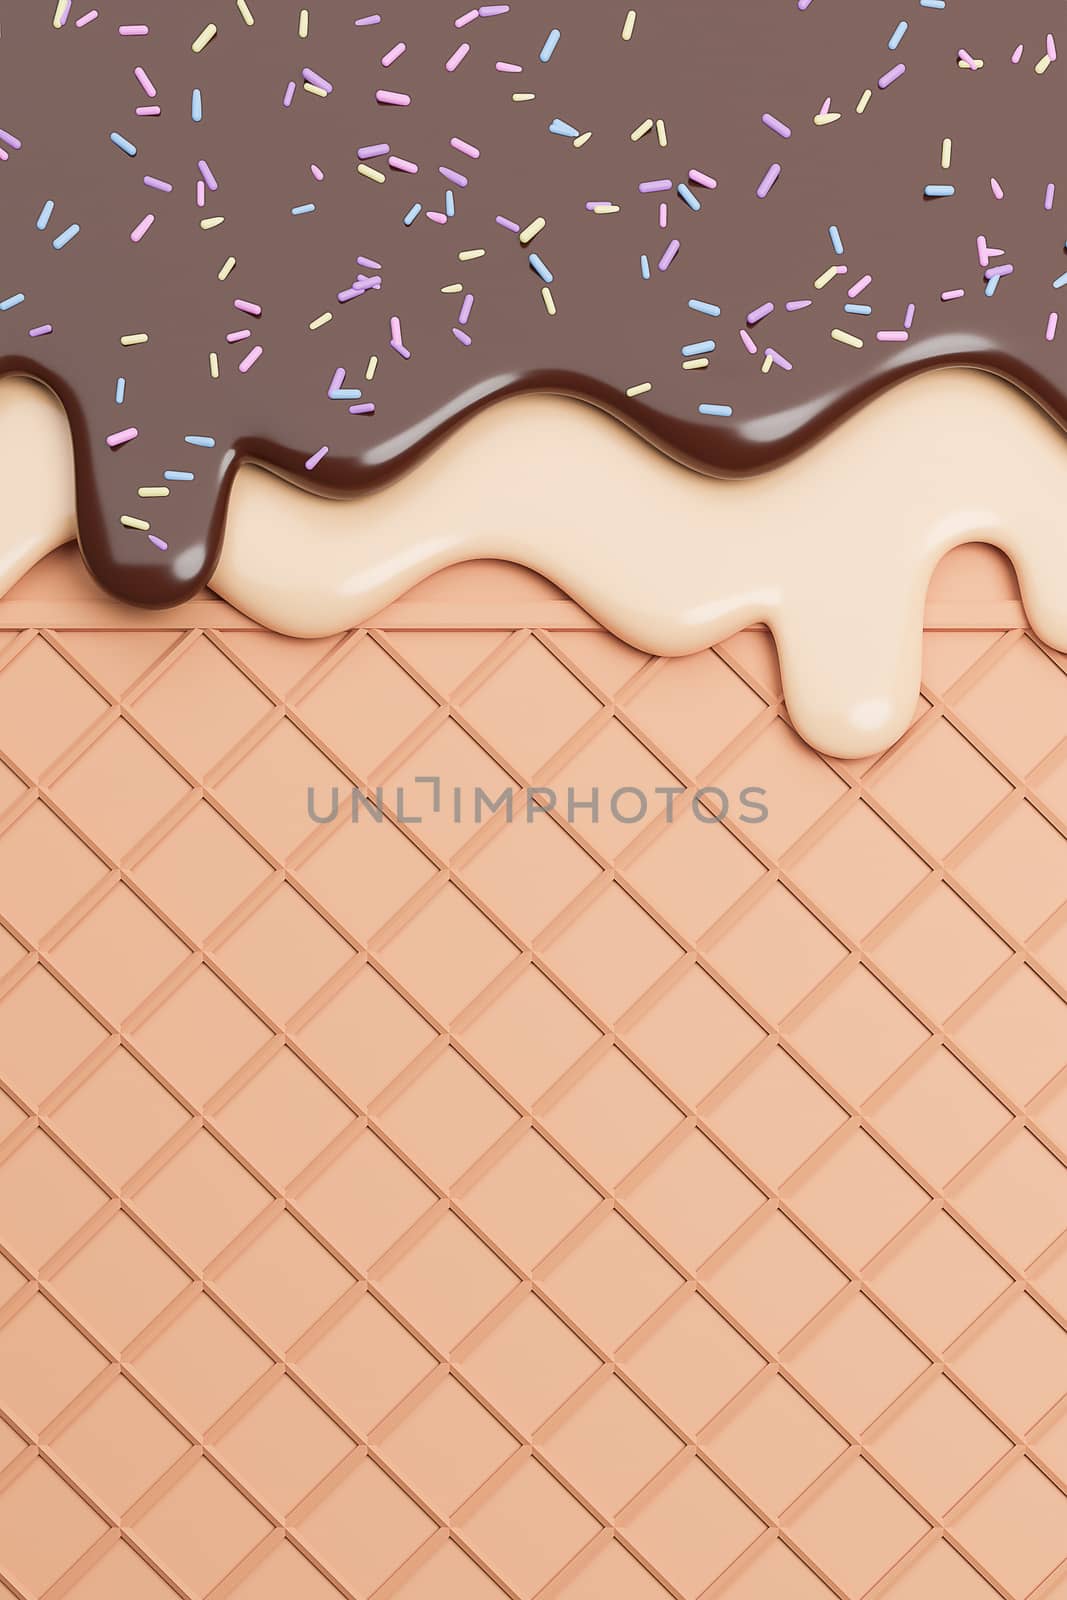 Chocolate and Vanilla Ice Cream Melted with Sprinkles on Wafer Background.,3d model and illustration. by anotestocker